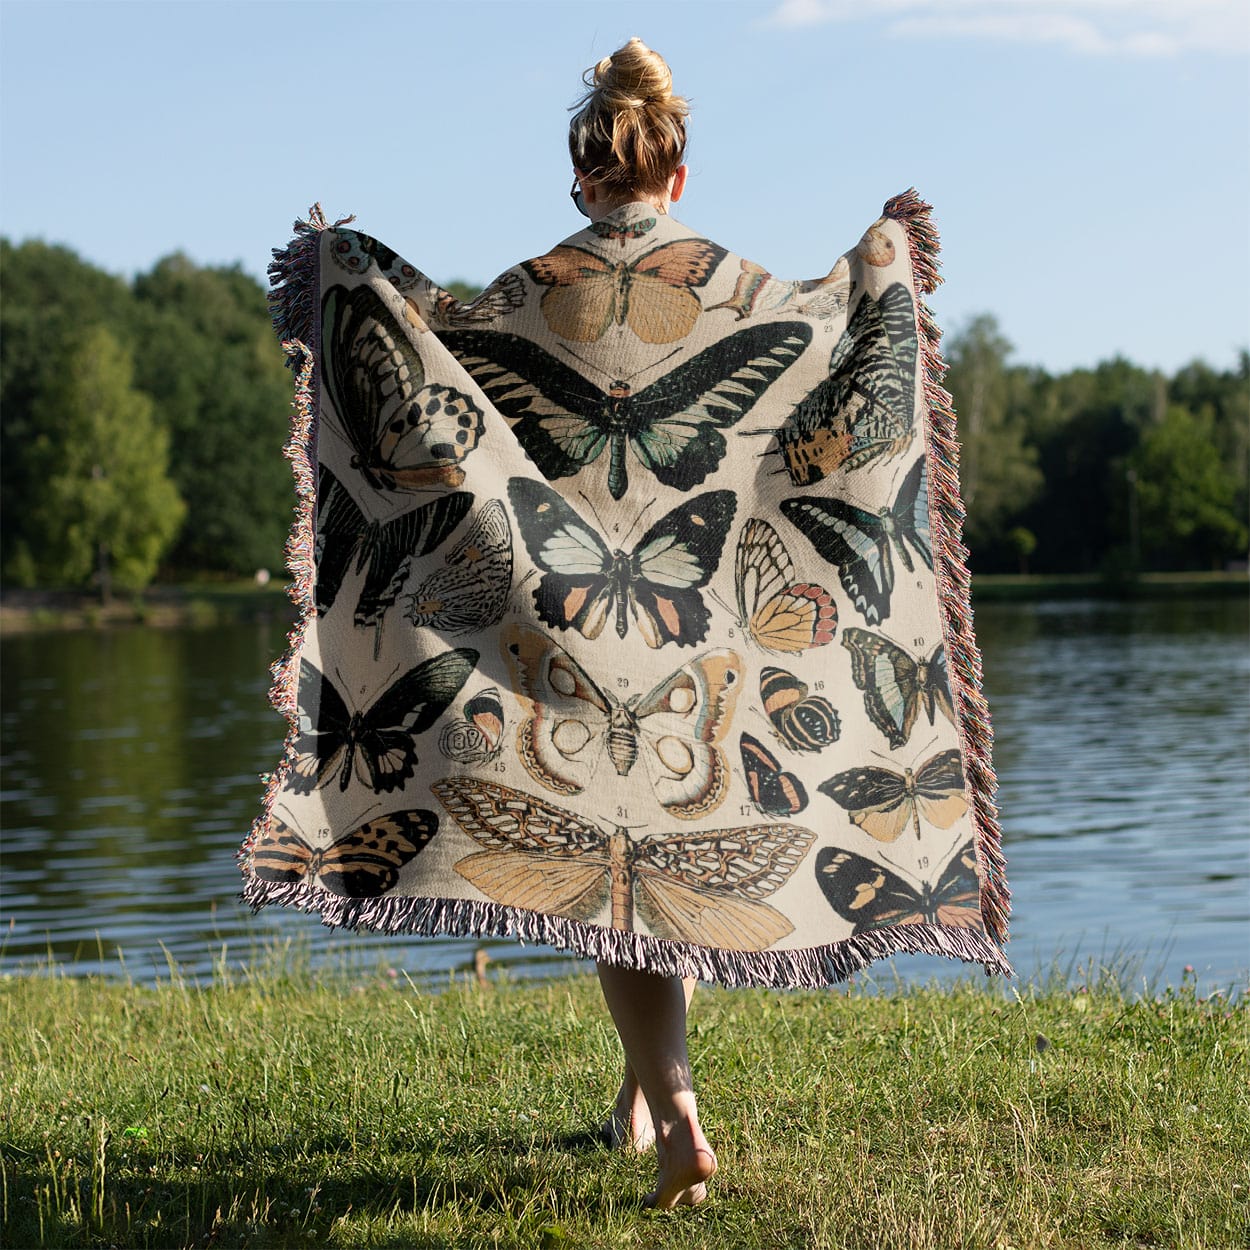 Butterflies and Moths Woven Blanket Held on a Woman's Back Outside